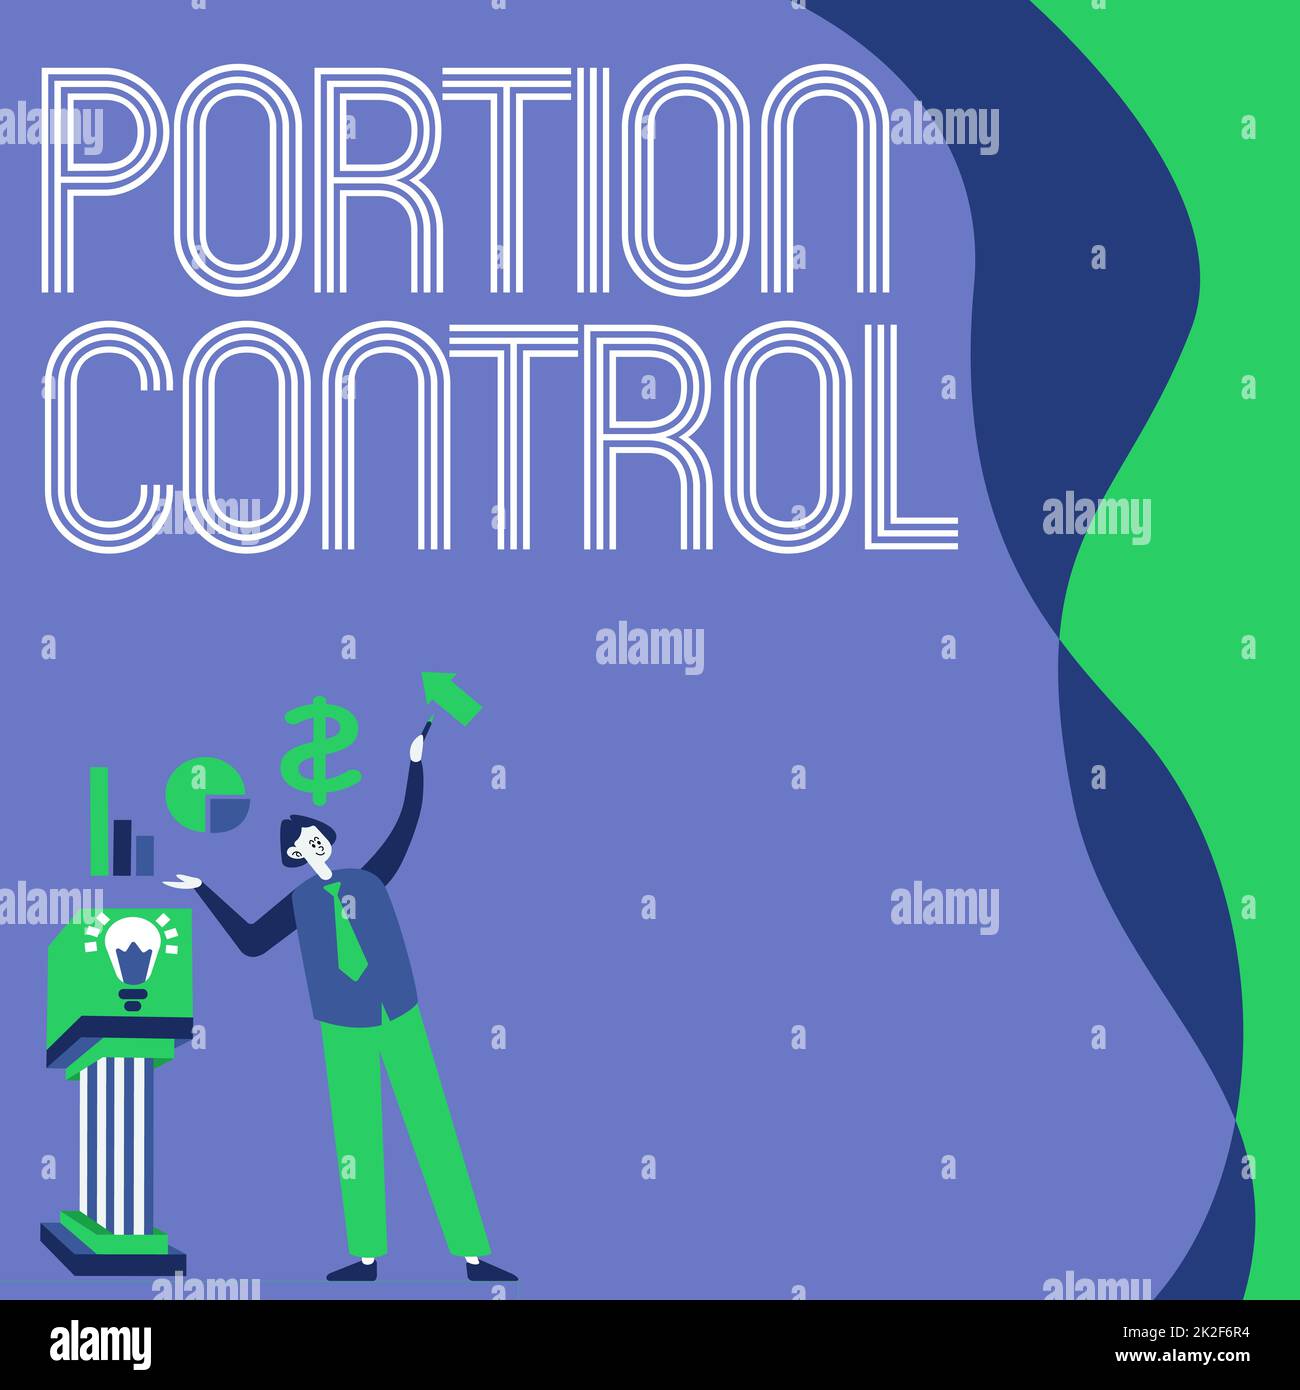 Writing displaying text Portion Control. Concept meaning knowing the correct measures or serving sizes as per calorie Manstanding Alone Presenting Charts And New Financial Ideas With Podium. Stock Photo